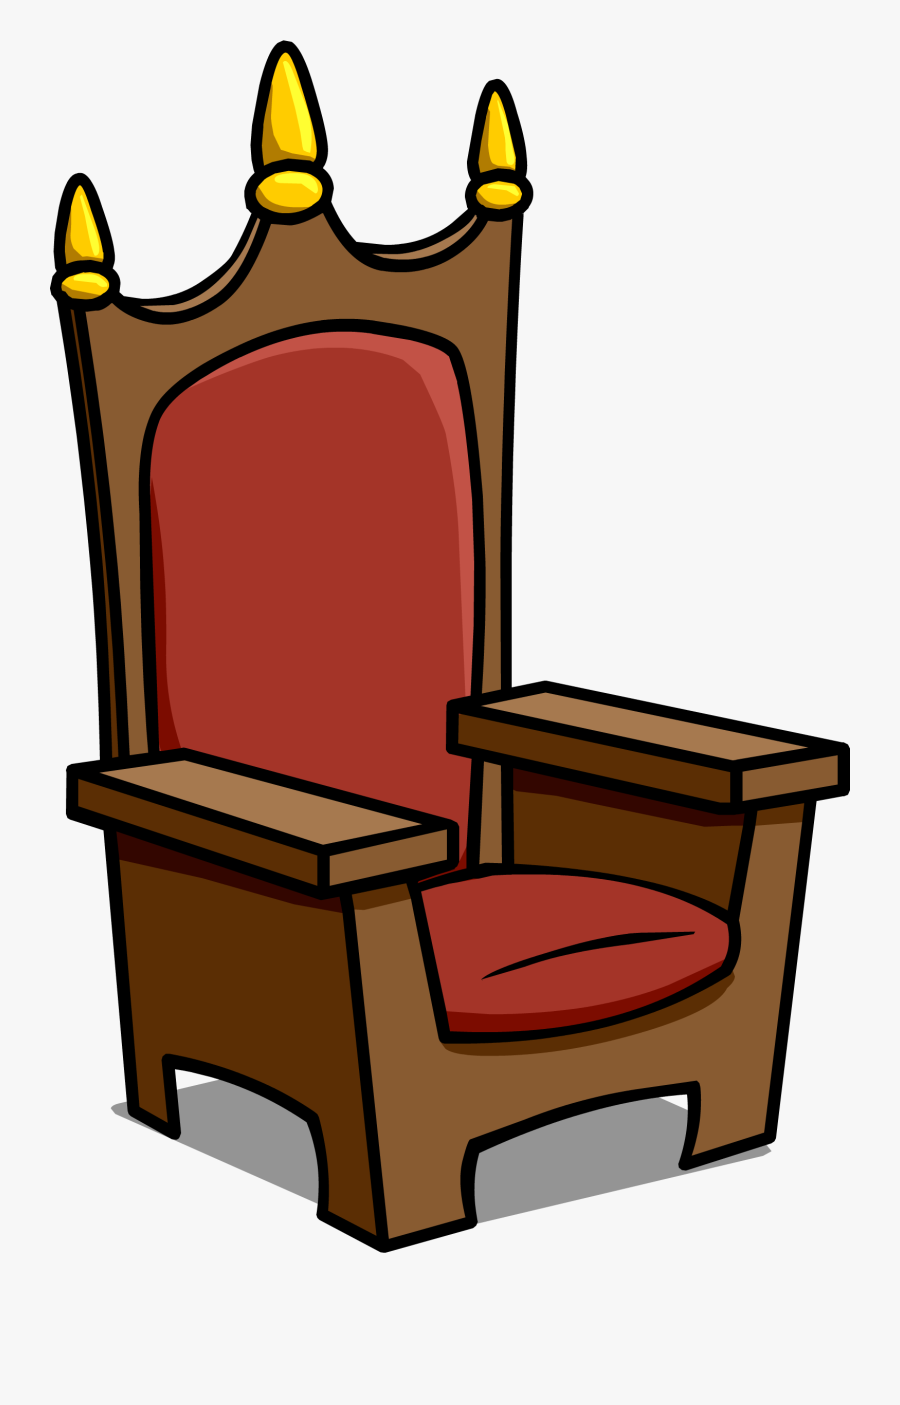 Transparent Throne Png - Cartoon Throne Chair Png, Transparent Clipart